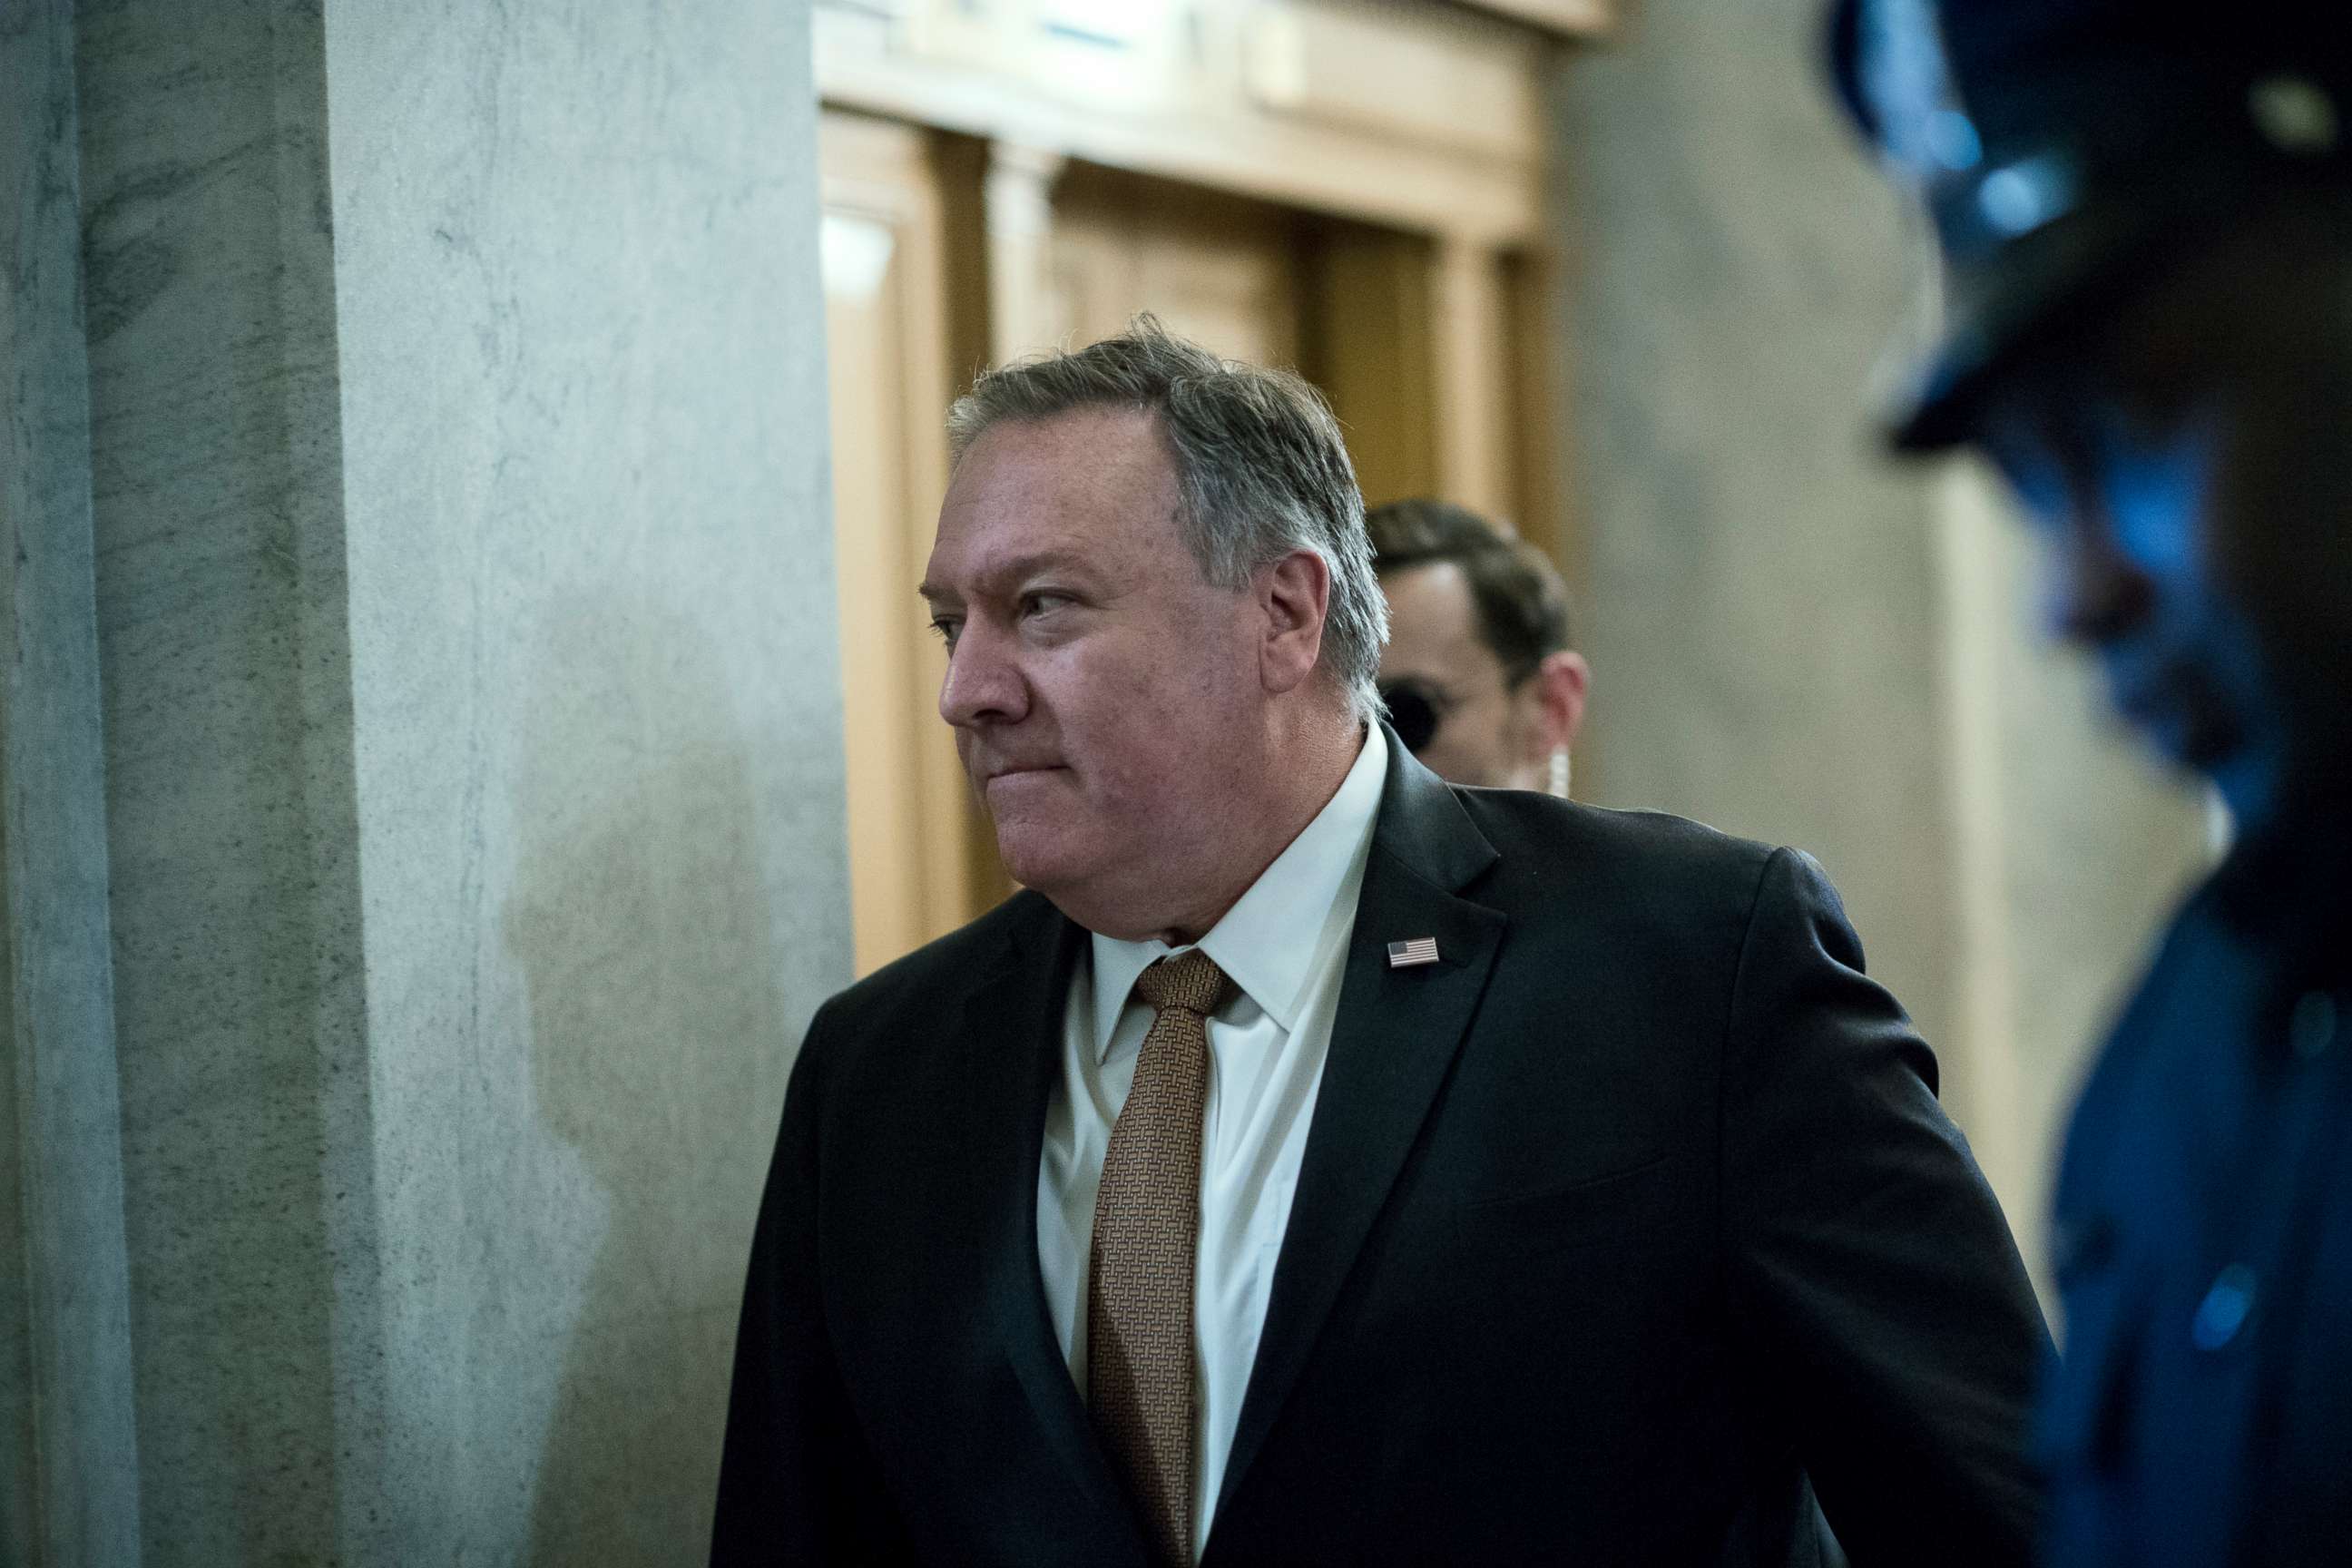 PHOTO: Secretary of State Mike Pompeo arrives in the Capitol for a briefing, Jan. 6, 2020.